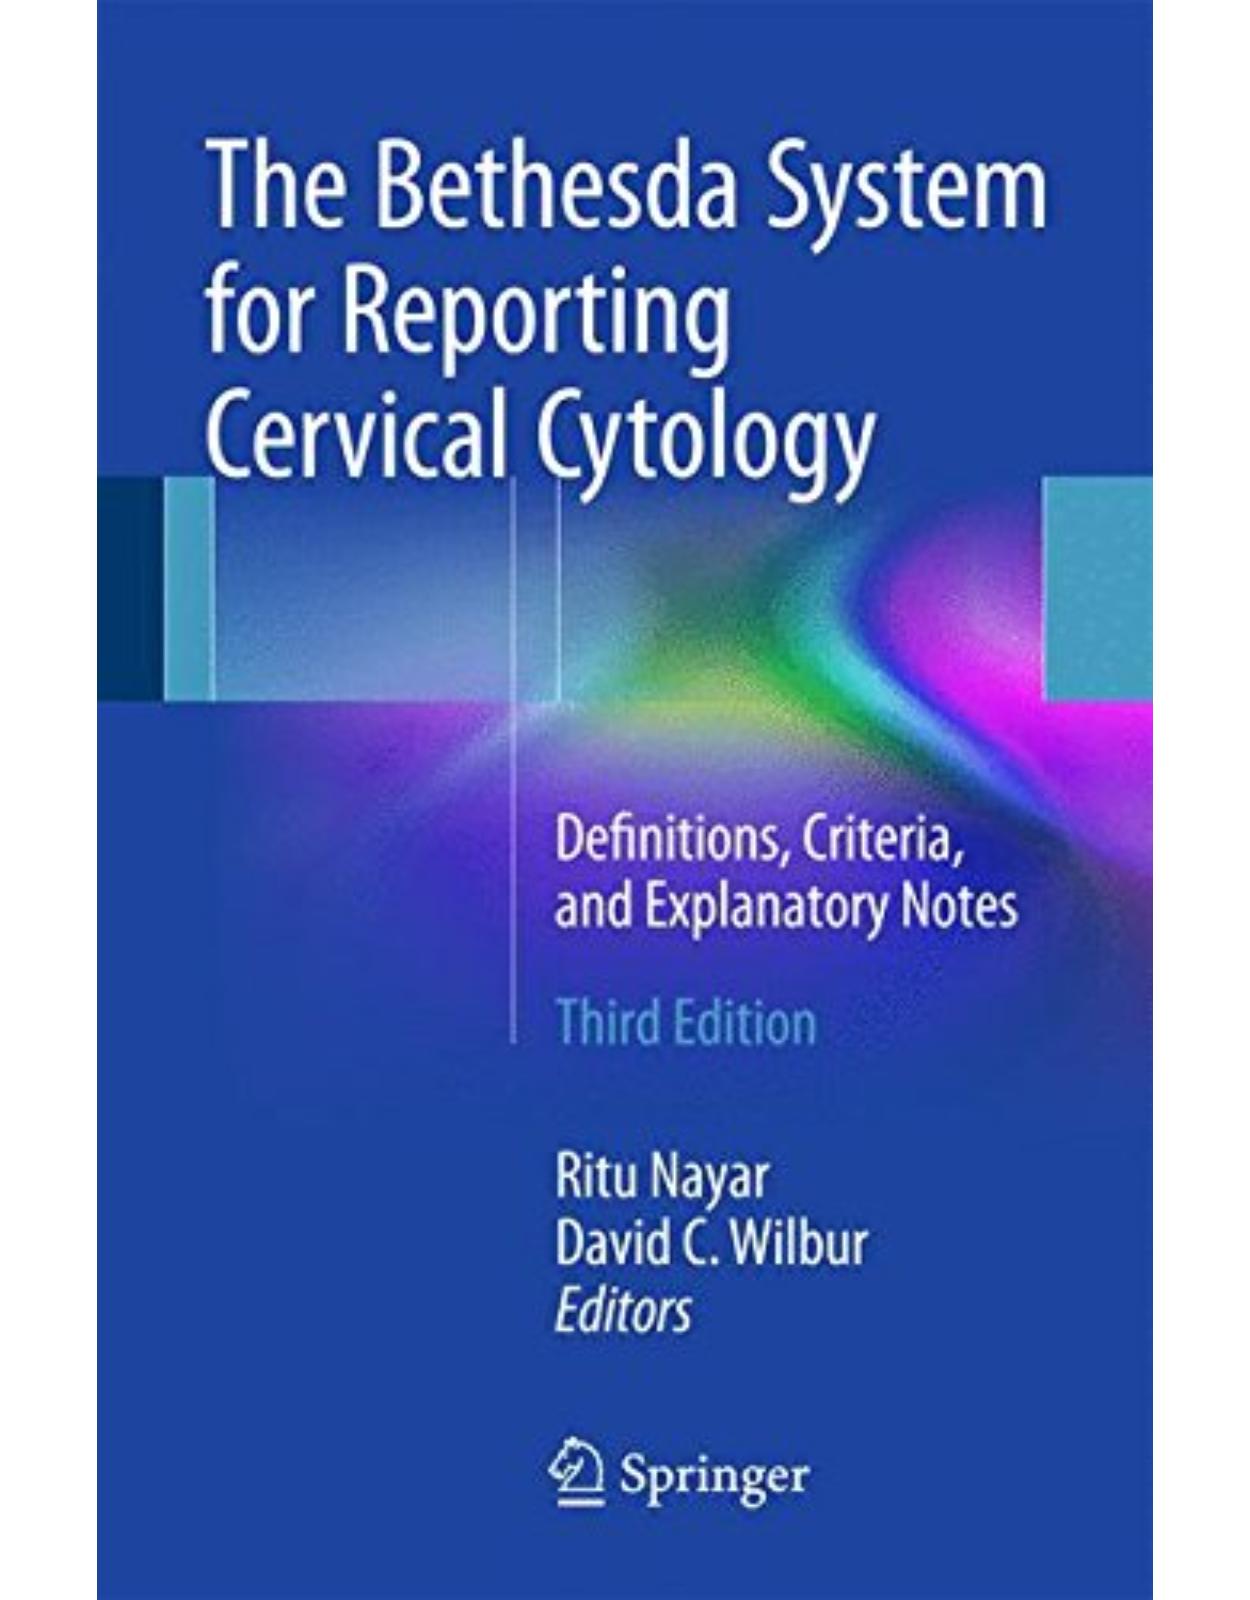 The Bethesda System for Reporting Cervical Cytology. Definitions, Criteria, and Explanatory Notes